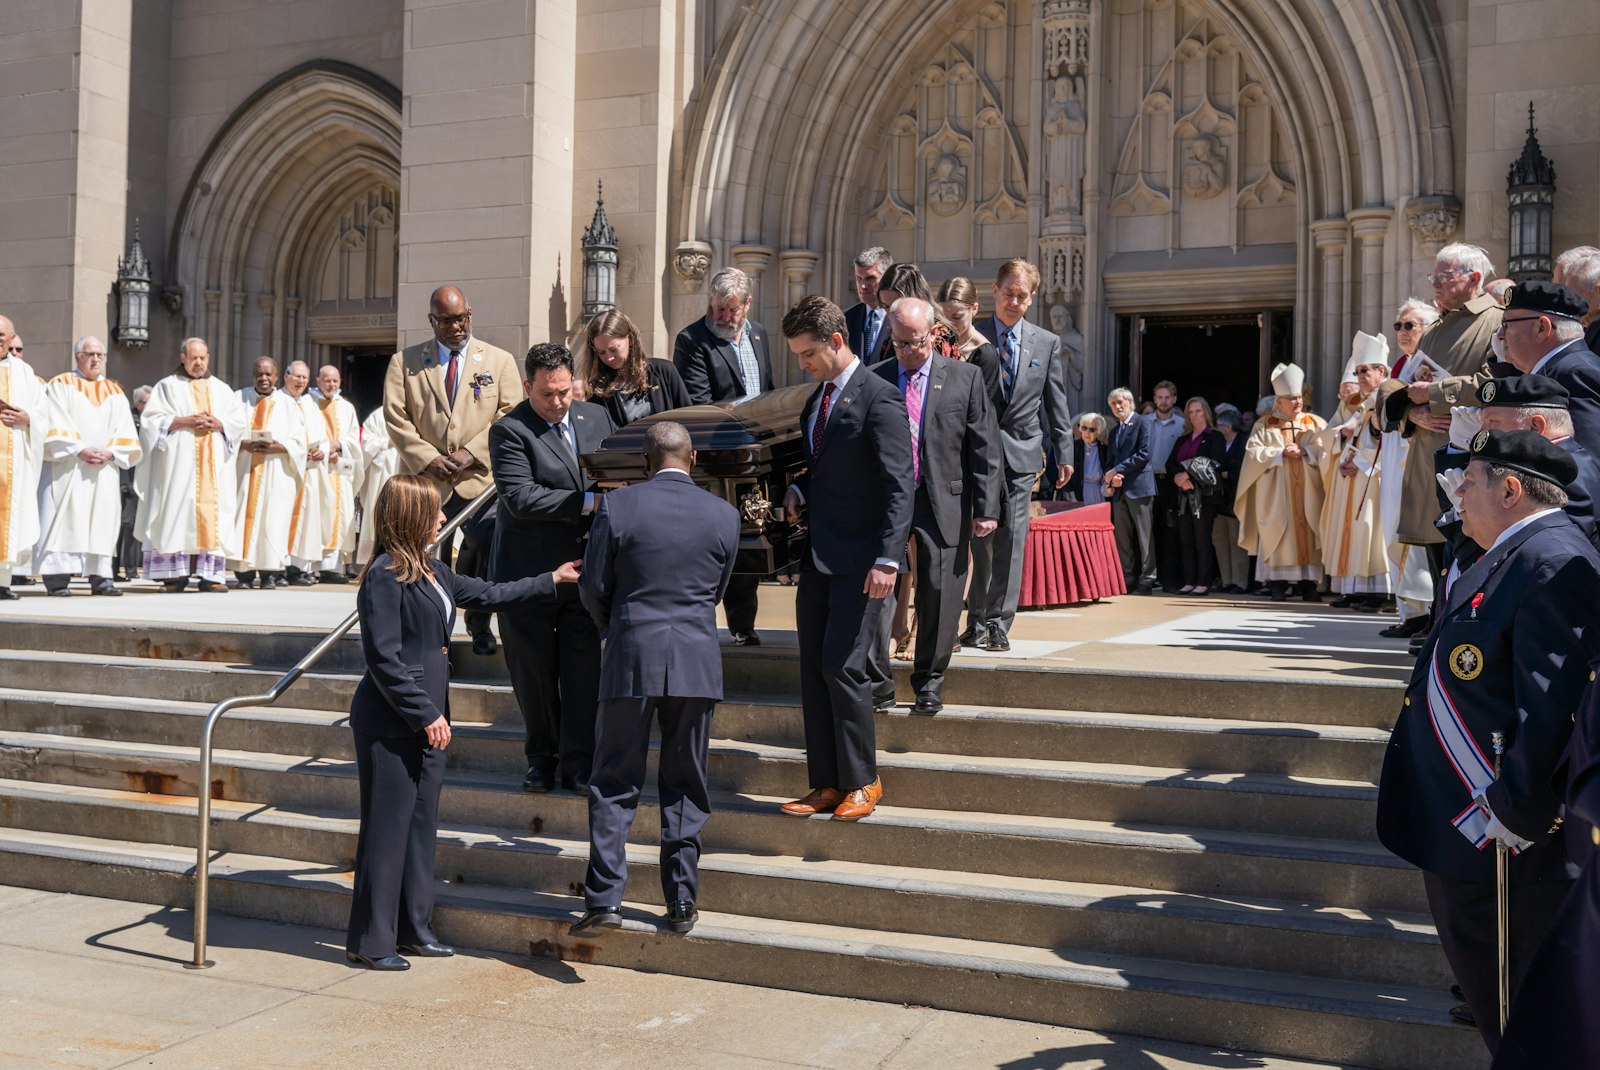 Pallbearers carry Bishop Gumbleton's casket to a waiting hearse following the funeral Mass.